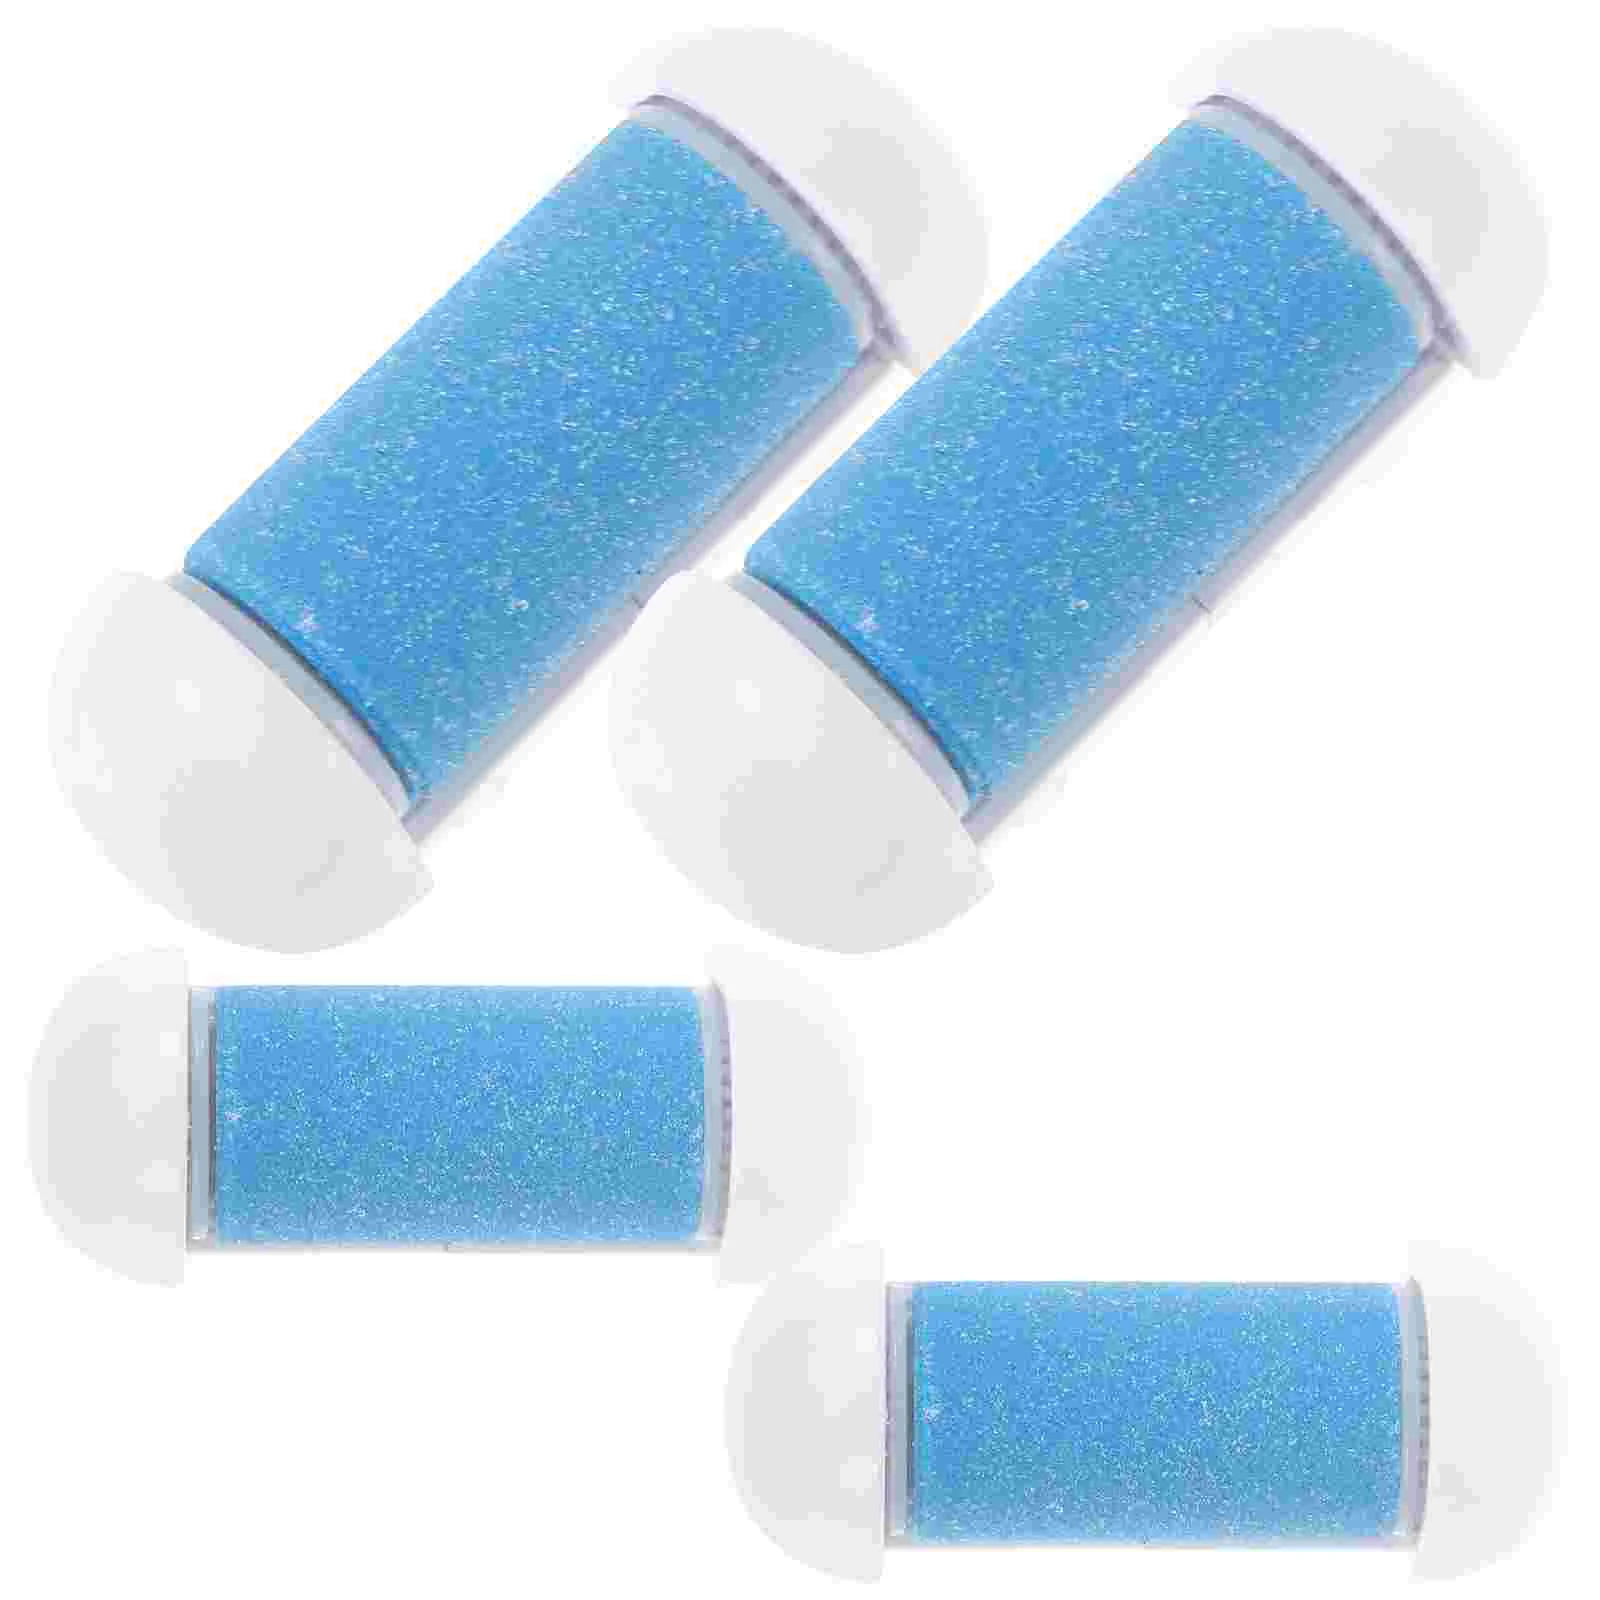 

4pcs Feet Care Tool Skin Care Foot Dead Skin Removal Replacement Roller Exfoliator Heel File Cuticles Callus Remover Head(Blue)